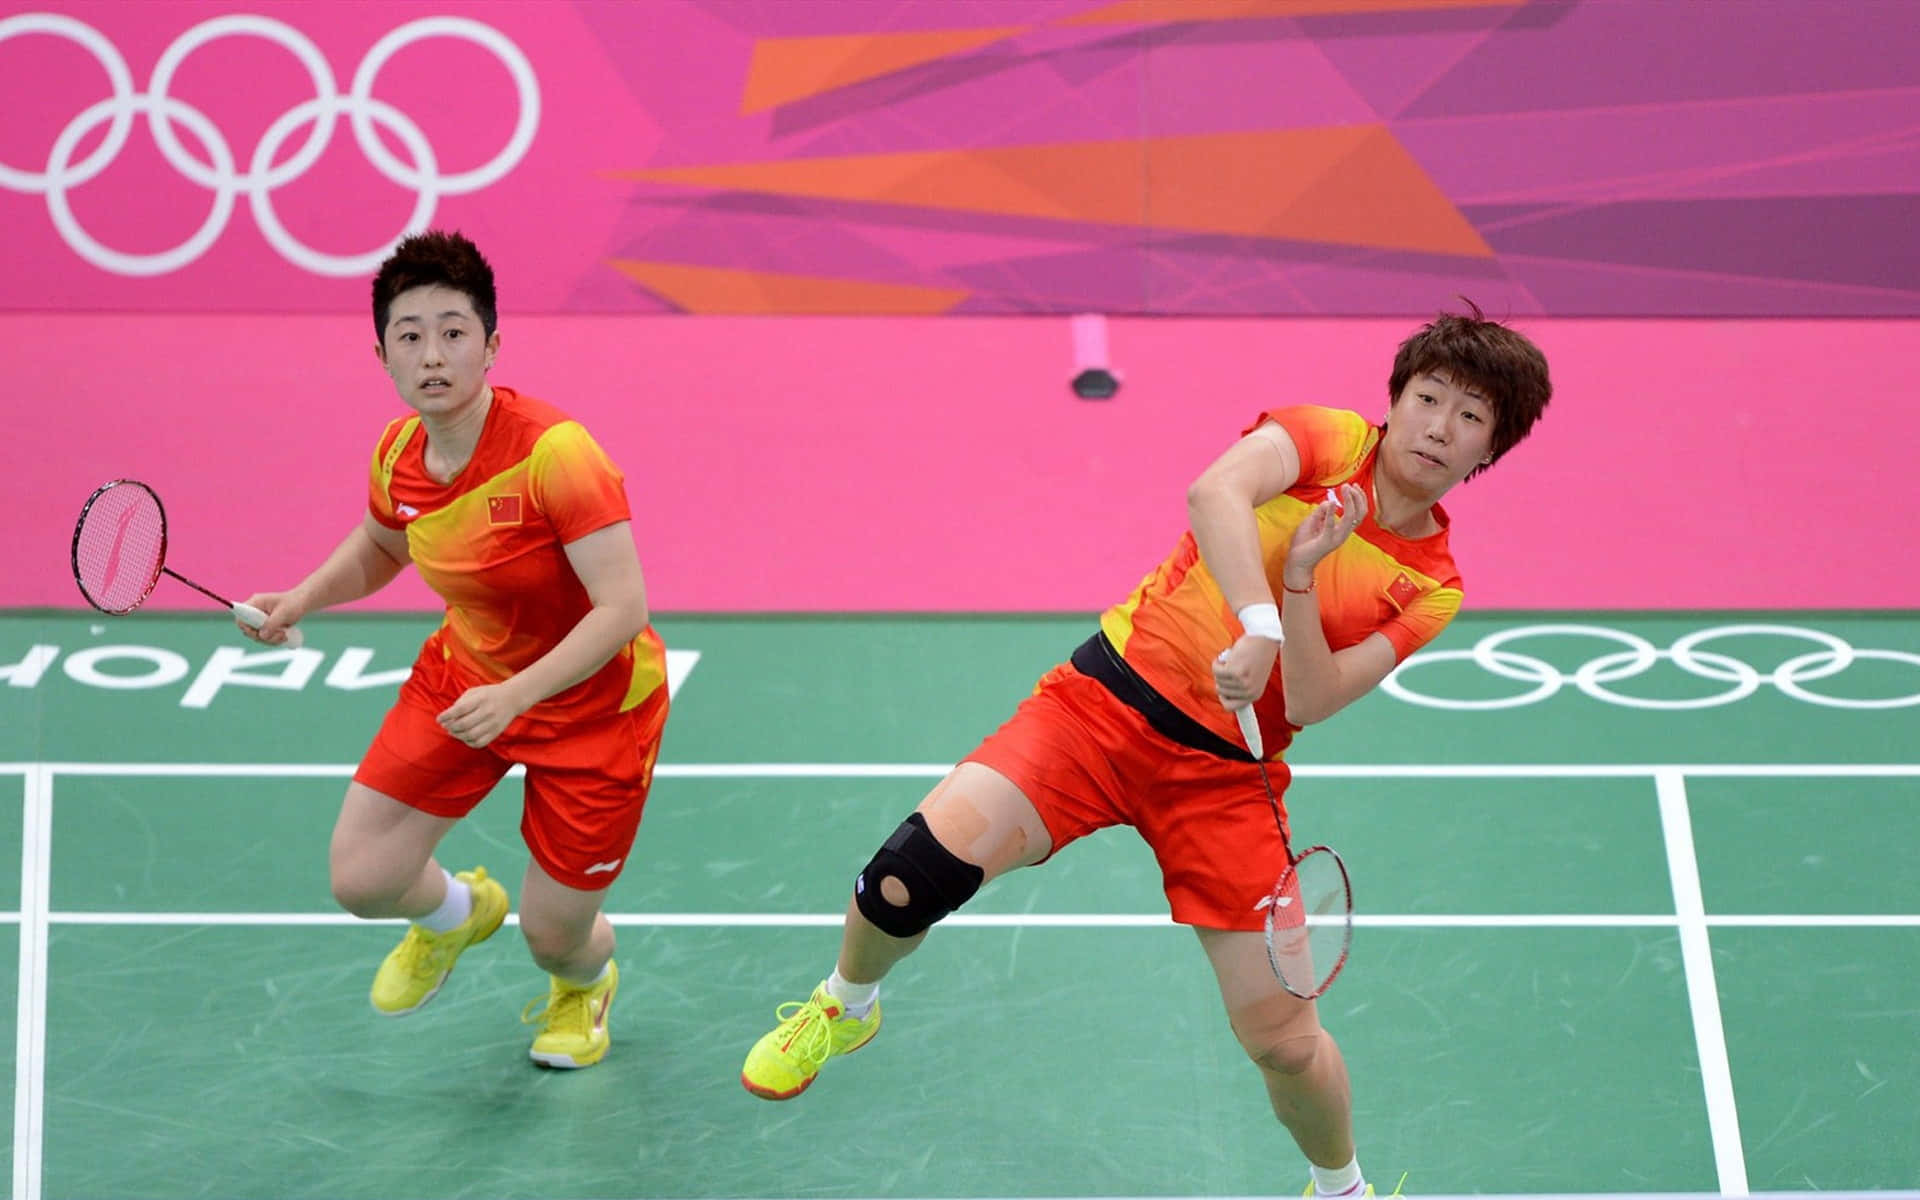 Professional Badminton Players Competing Intensely